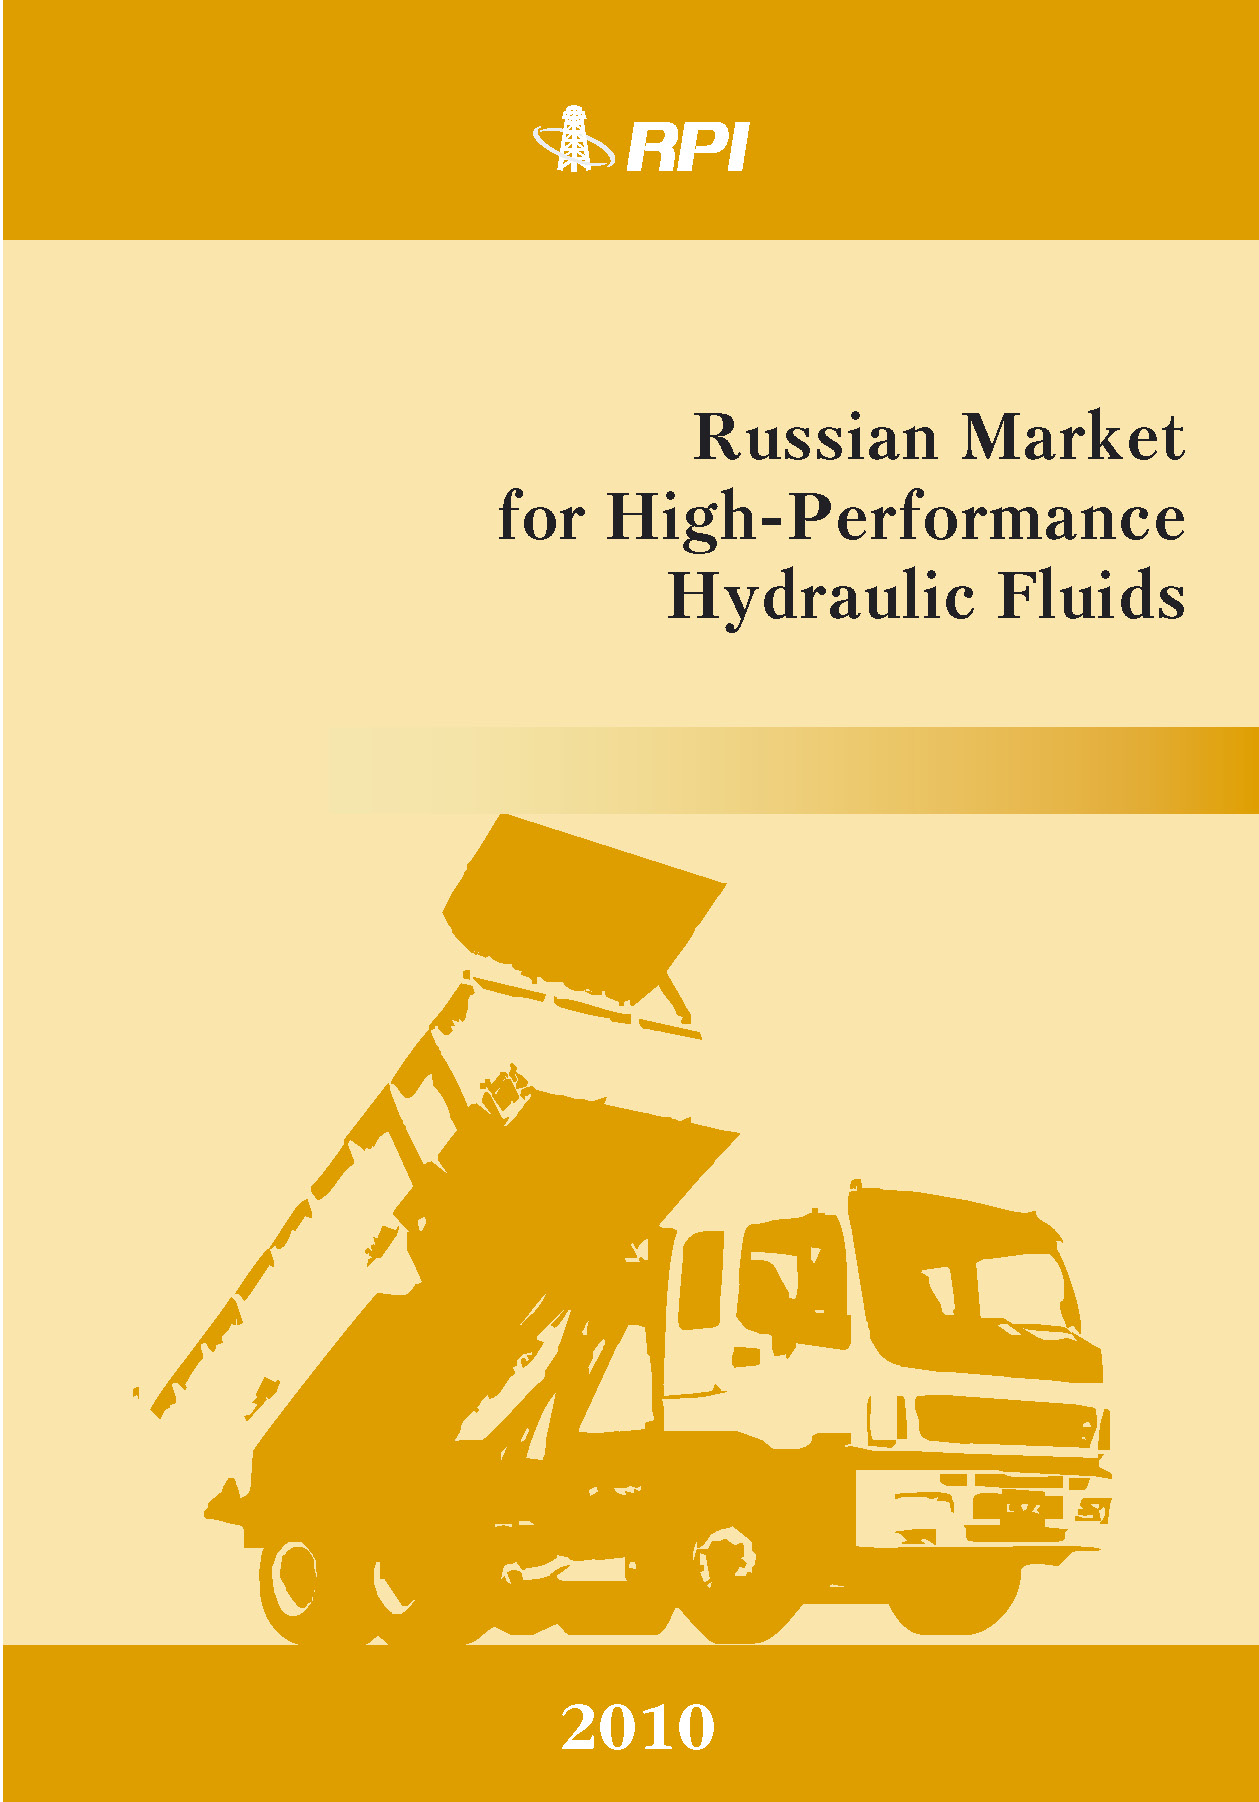 Russian Market for High-Performance Hydraulic Fluids: Graders